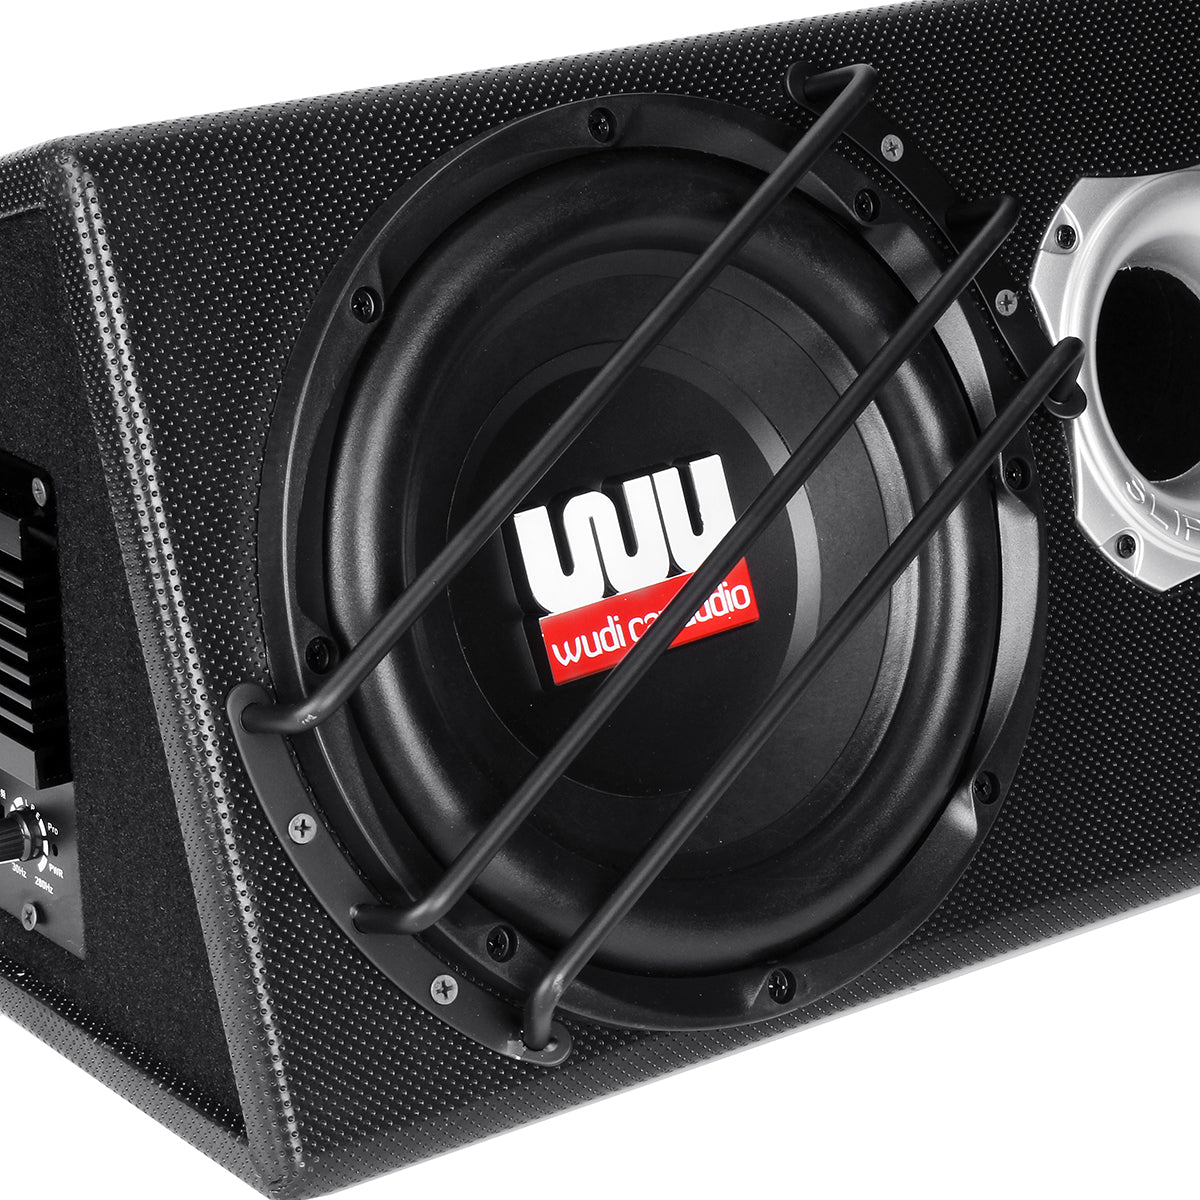 Black W10 Car Active Audio Stereo Subwoofer Powered Amplifier Enclosure Speaker With Wire 1100W 12V